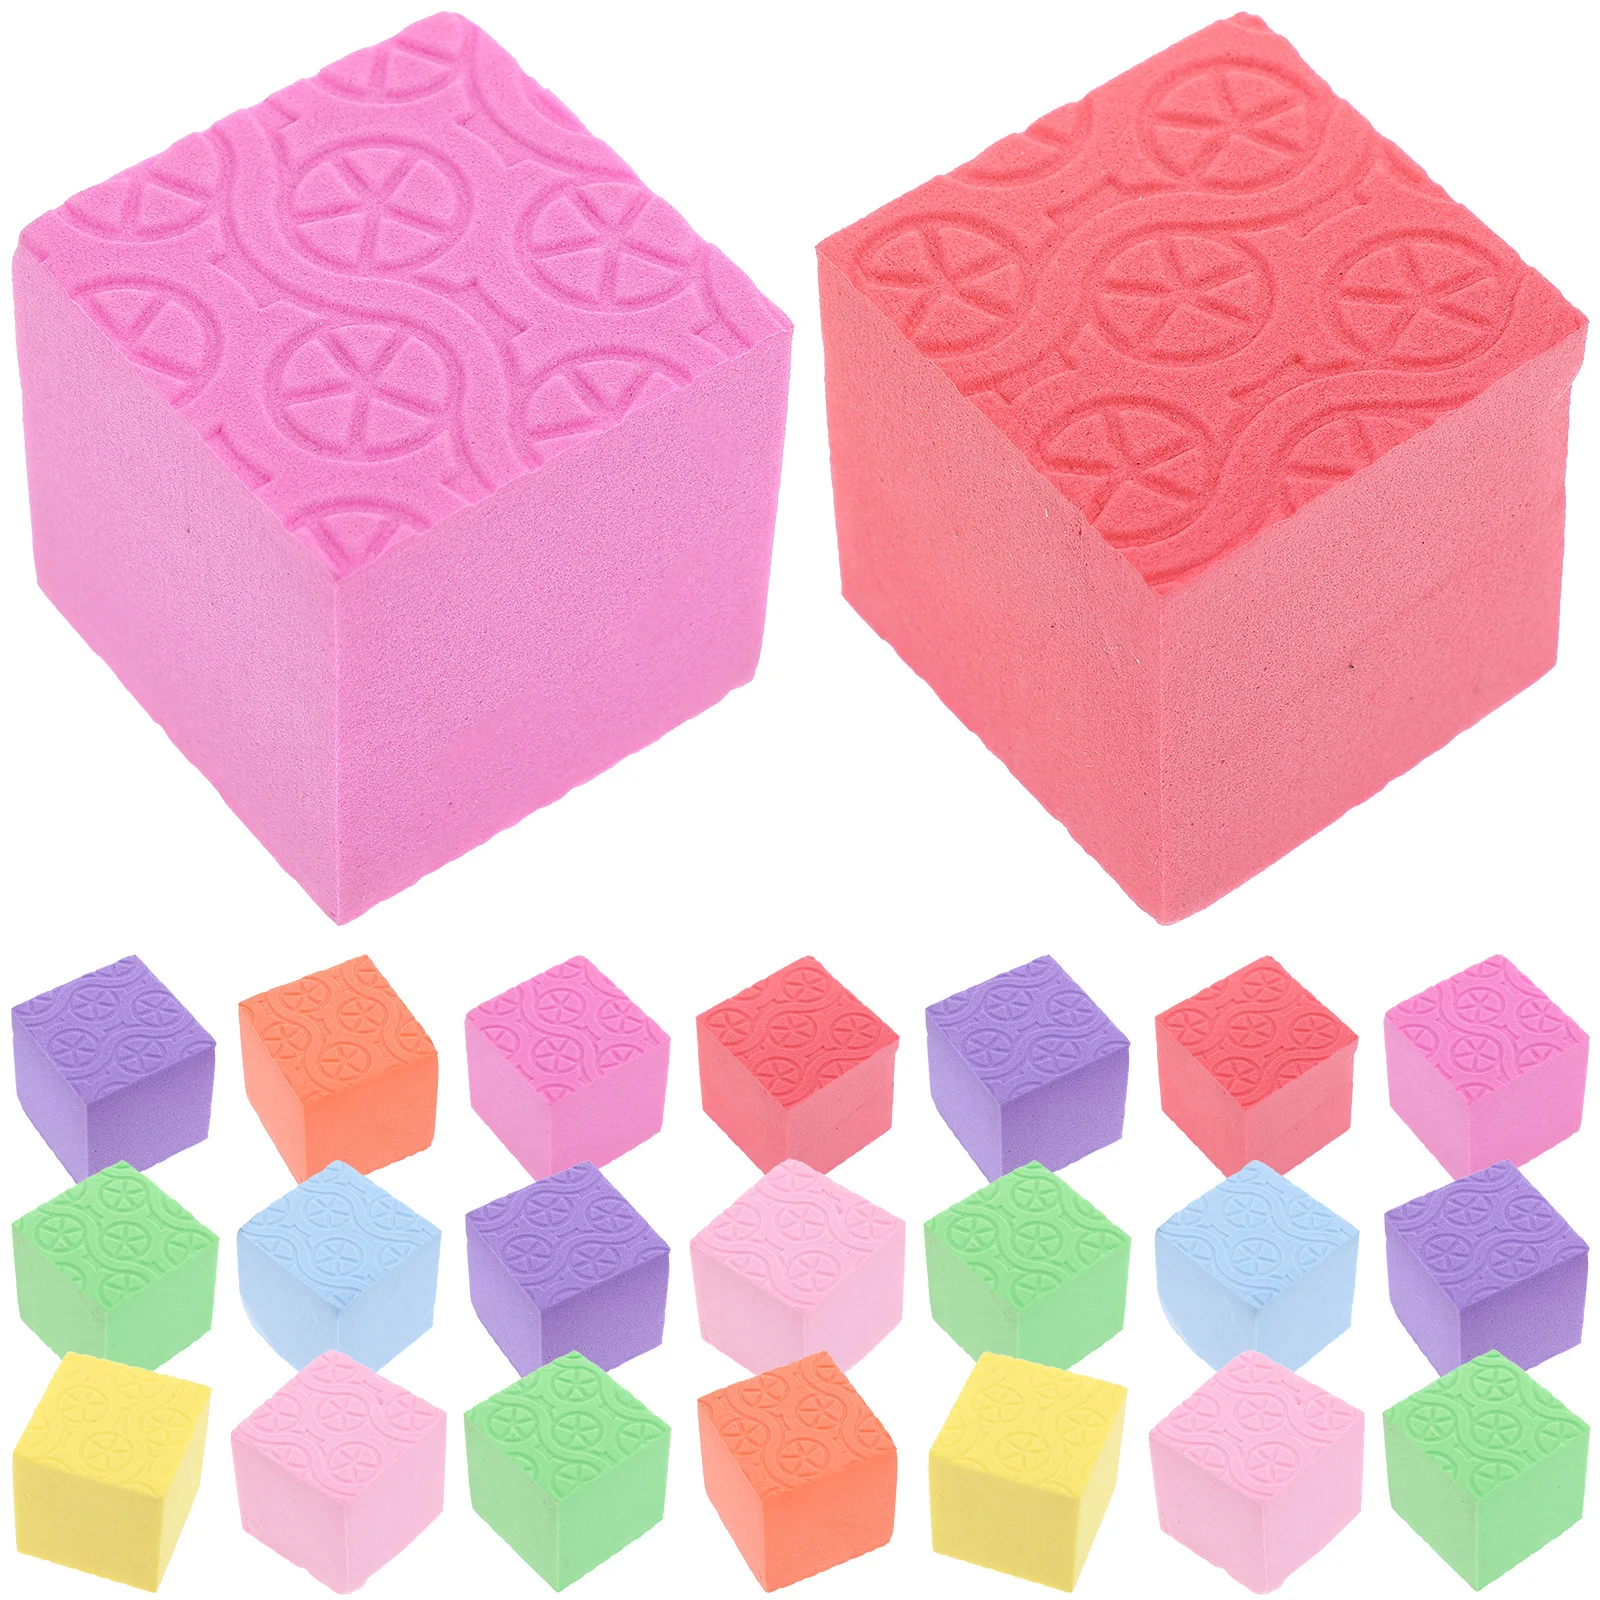 

Foam Building Blocks Educational Plaything Counters Cubes Kids Early Toy Colorful Toys